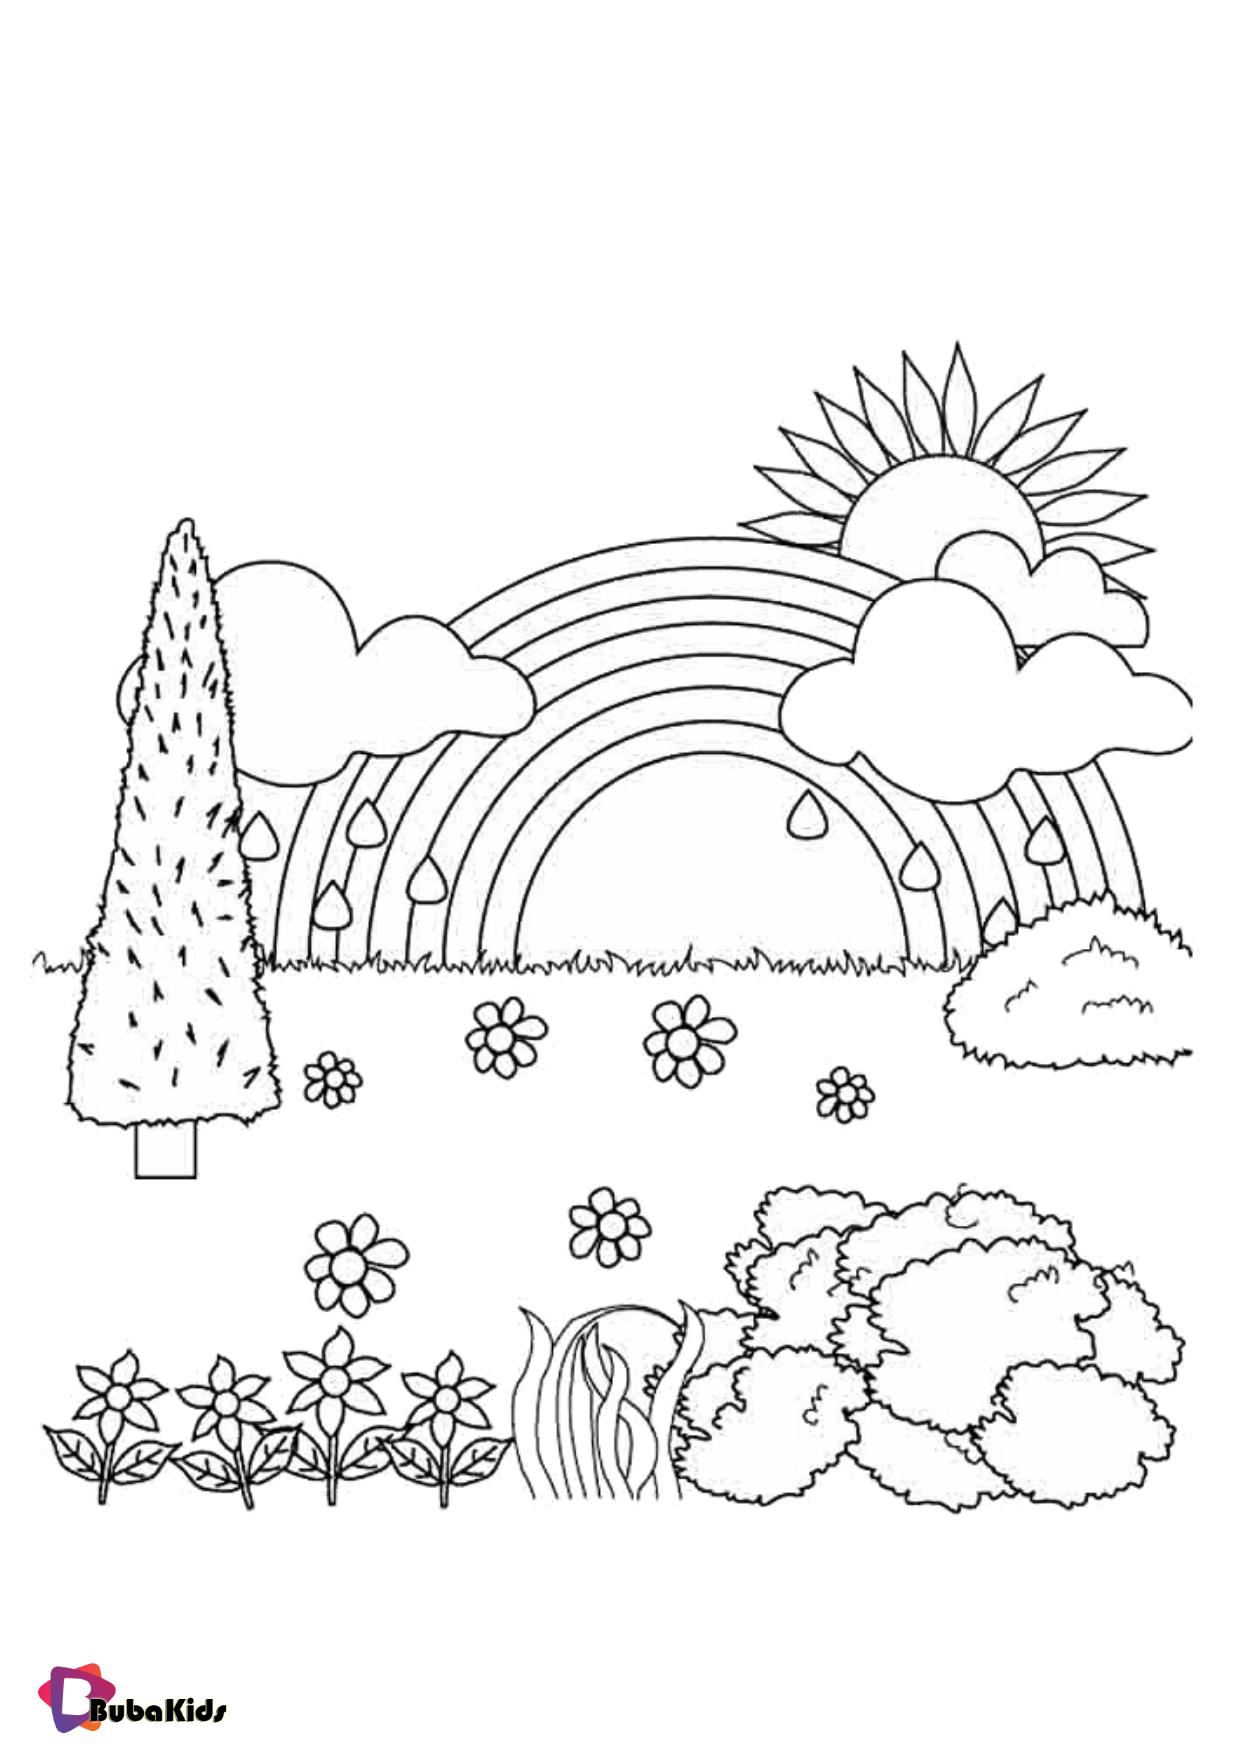 Rainbow sun cloud tree and flowers coloring pages Wallpaper